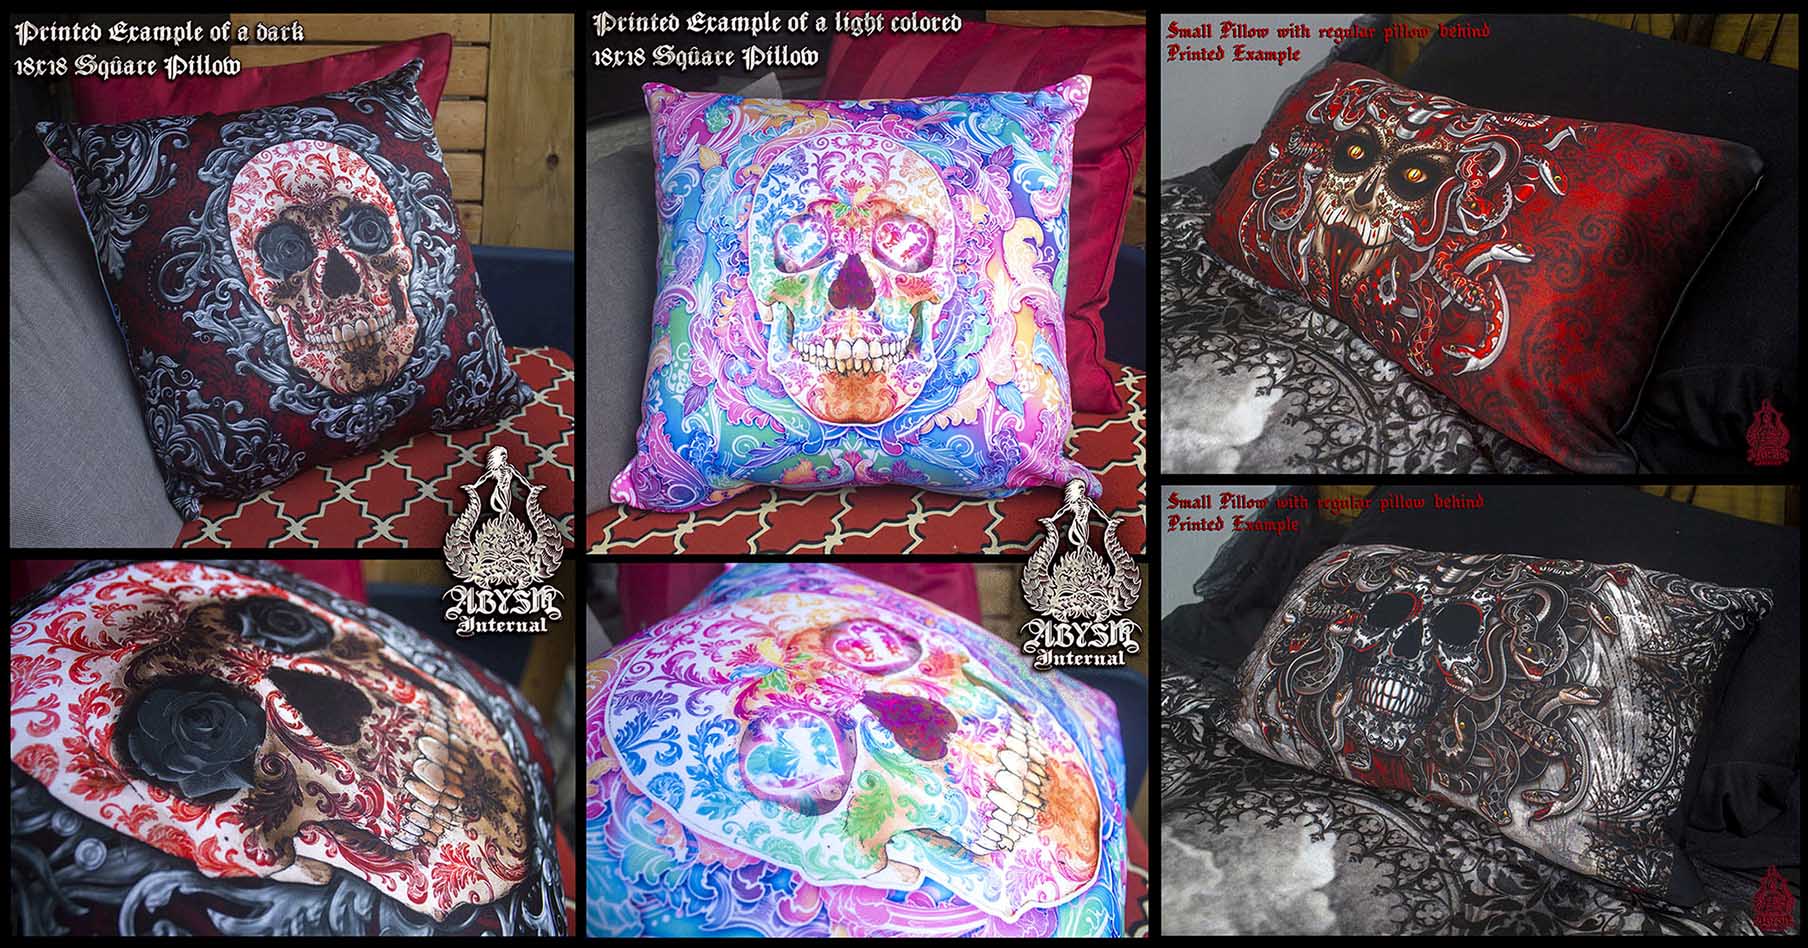 Abysm Internal Gothic and Fantasy Throw Pillow Samples